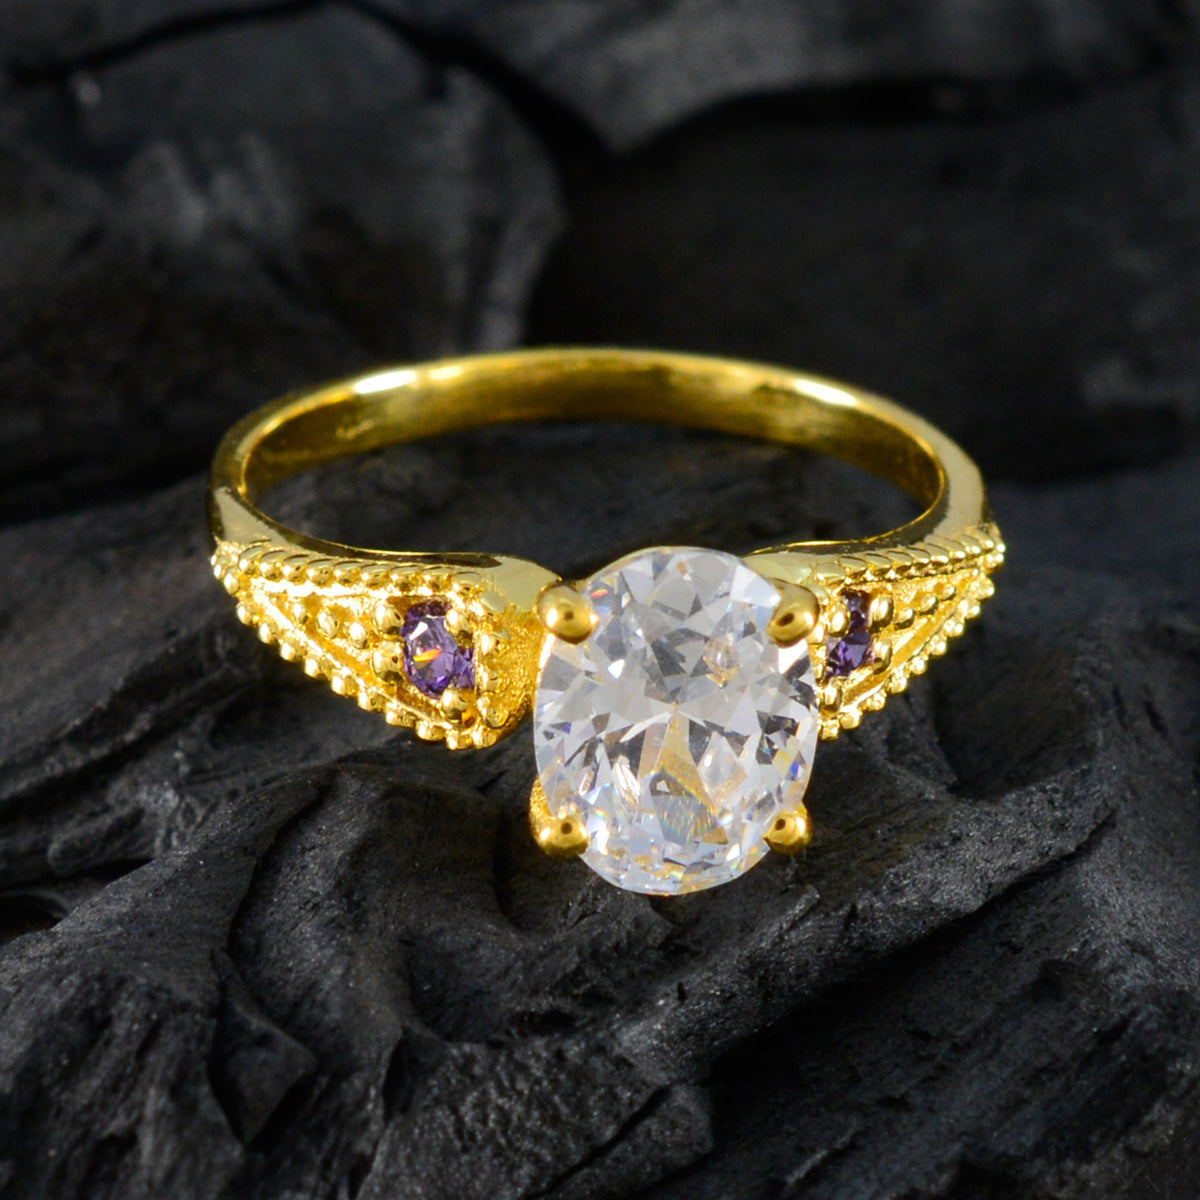 Riyo Classical Silver Ring With Yellow Gold Plating Amethyst Stone Oval Shape Prong Setting Stylish Jewelry Graduation Ring